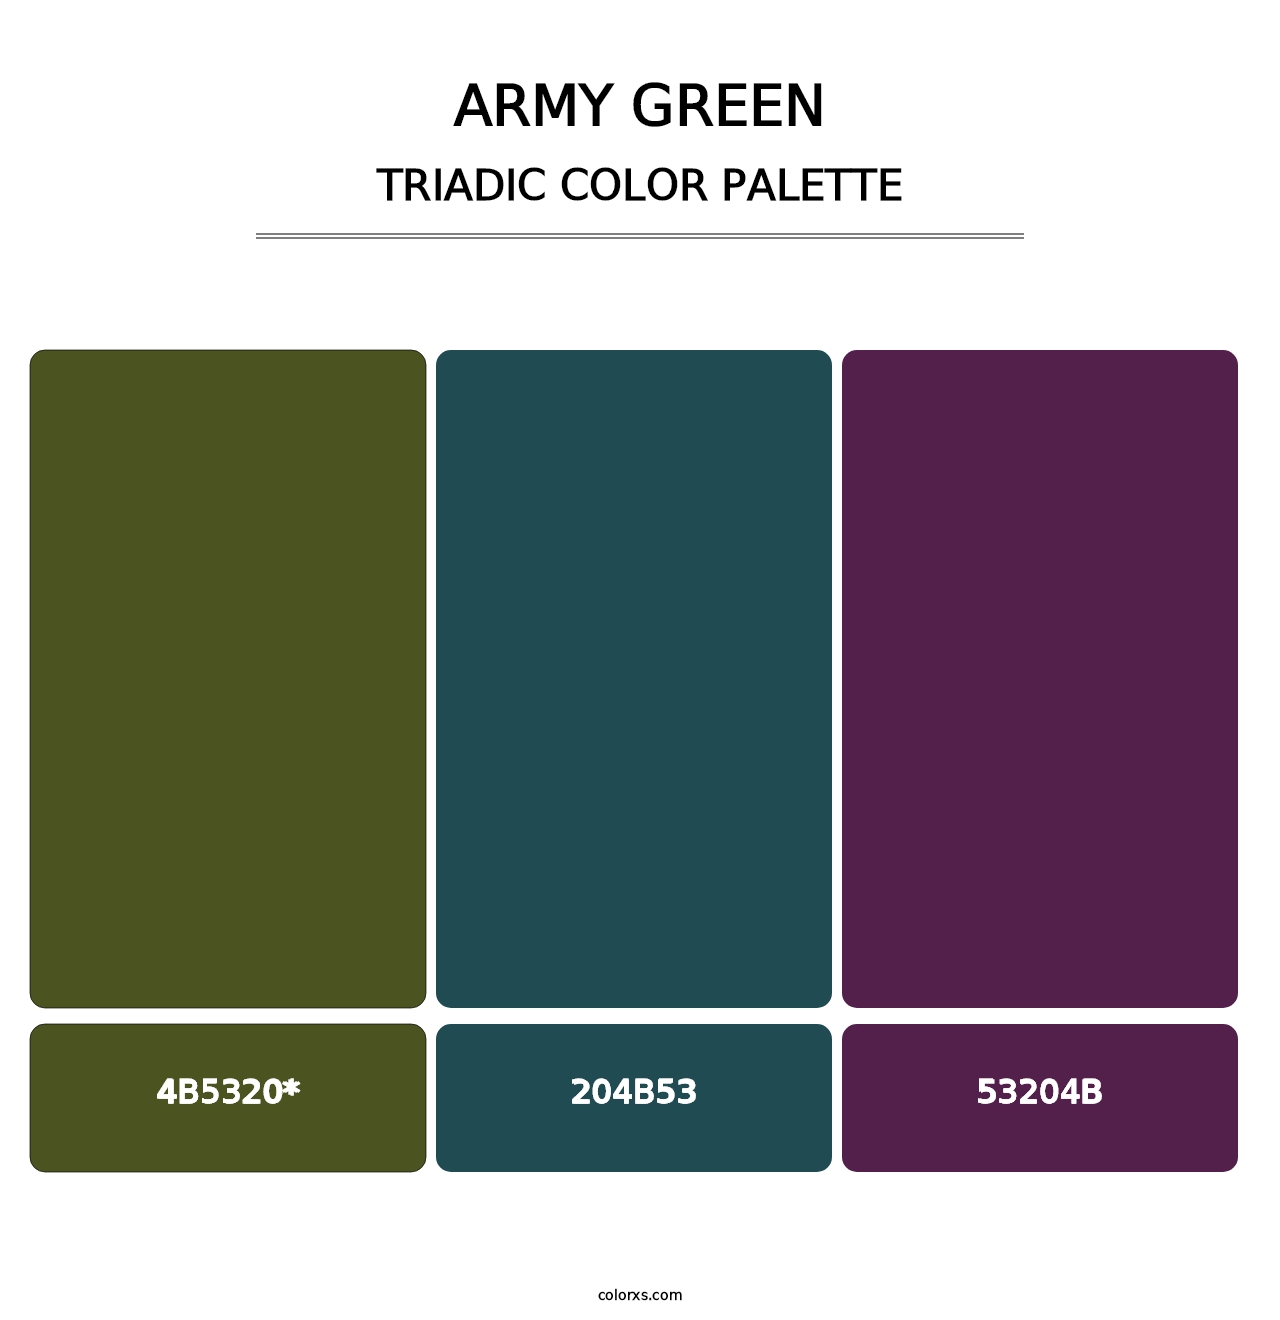 Army Green - Triadic Color Palette